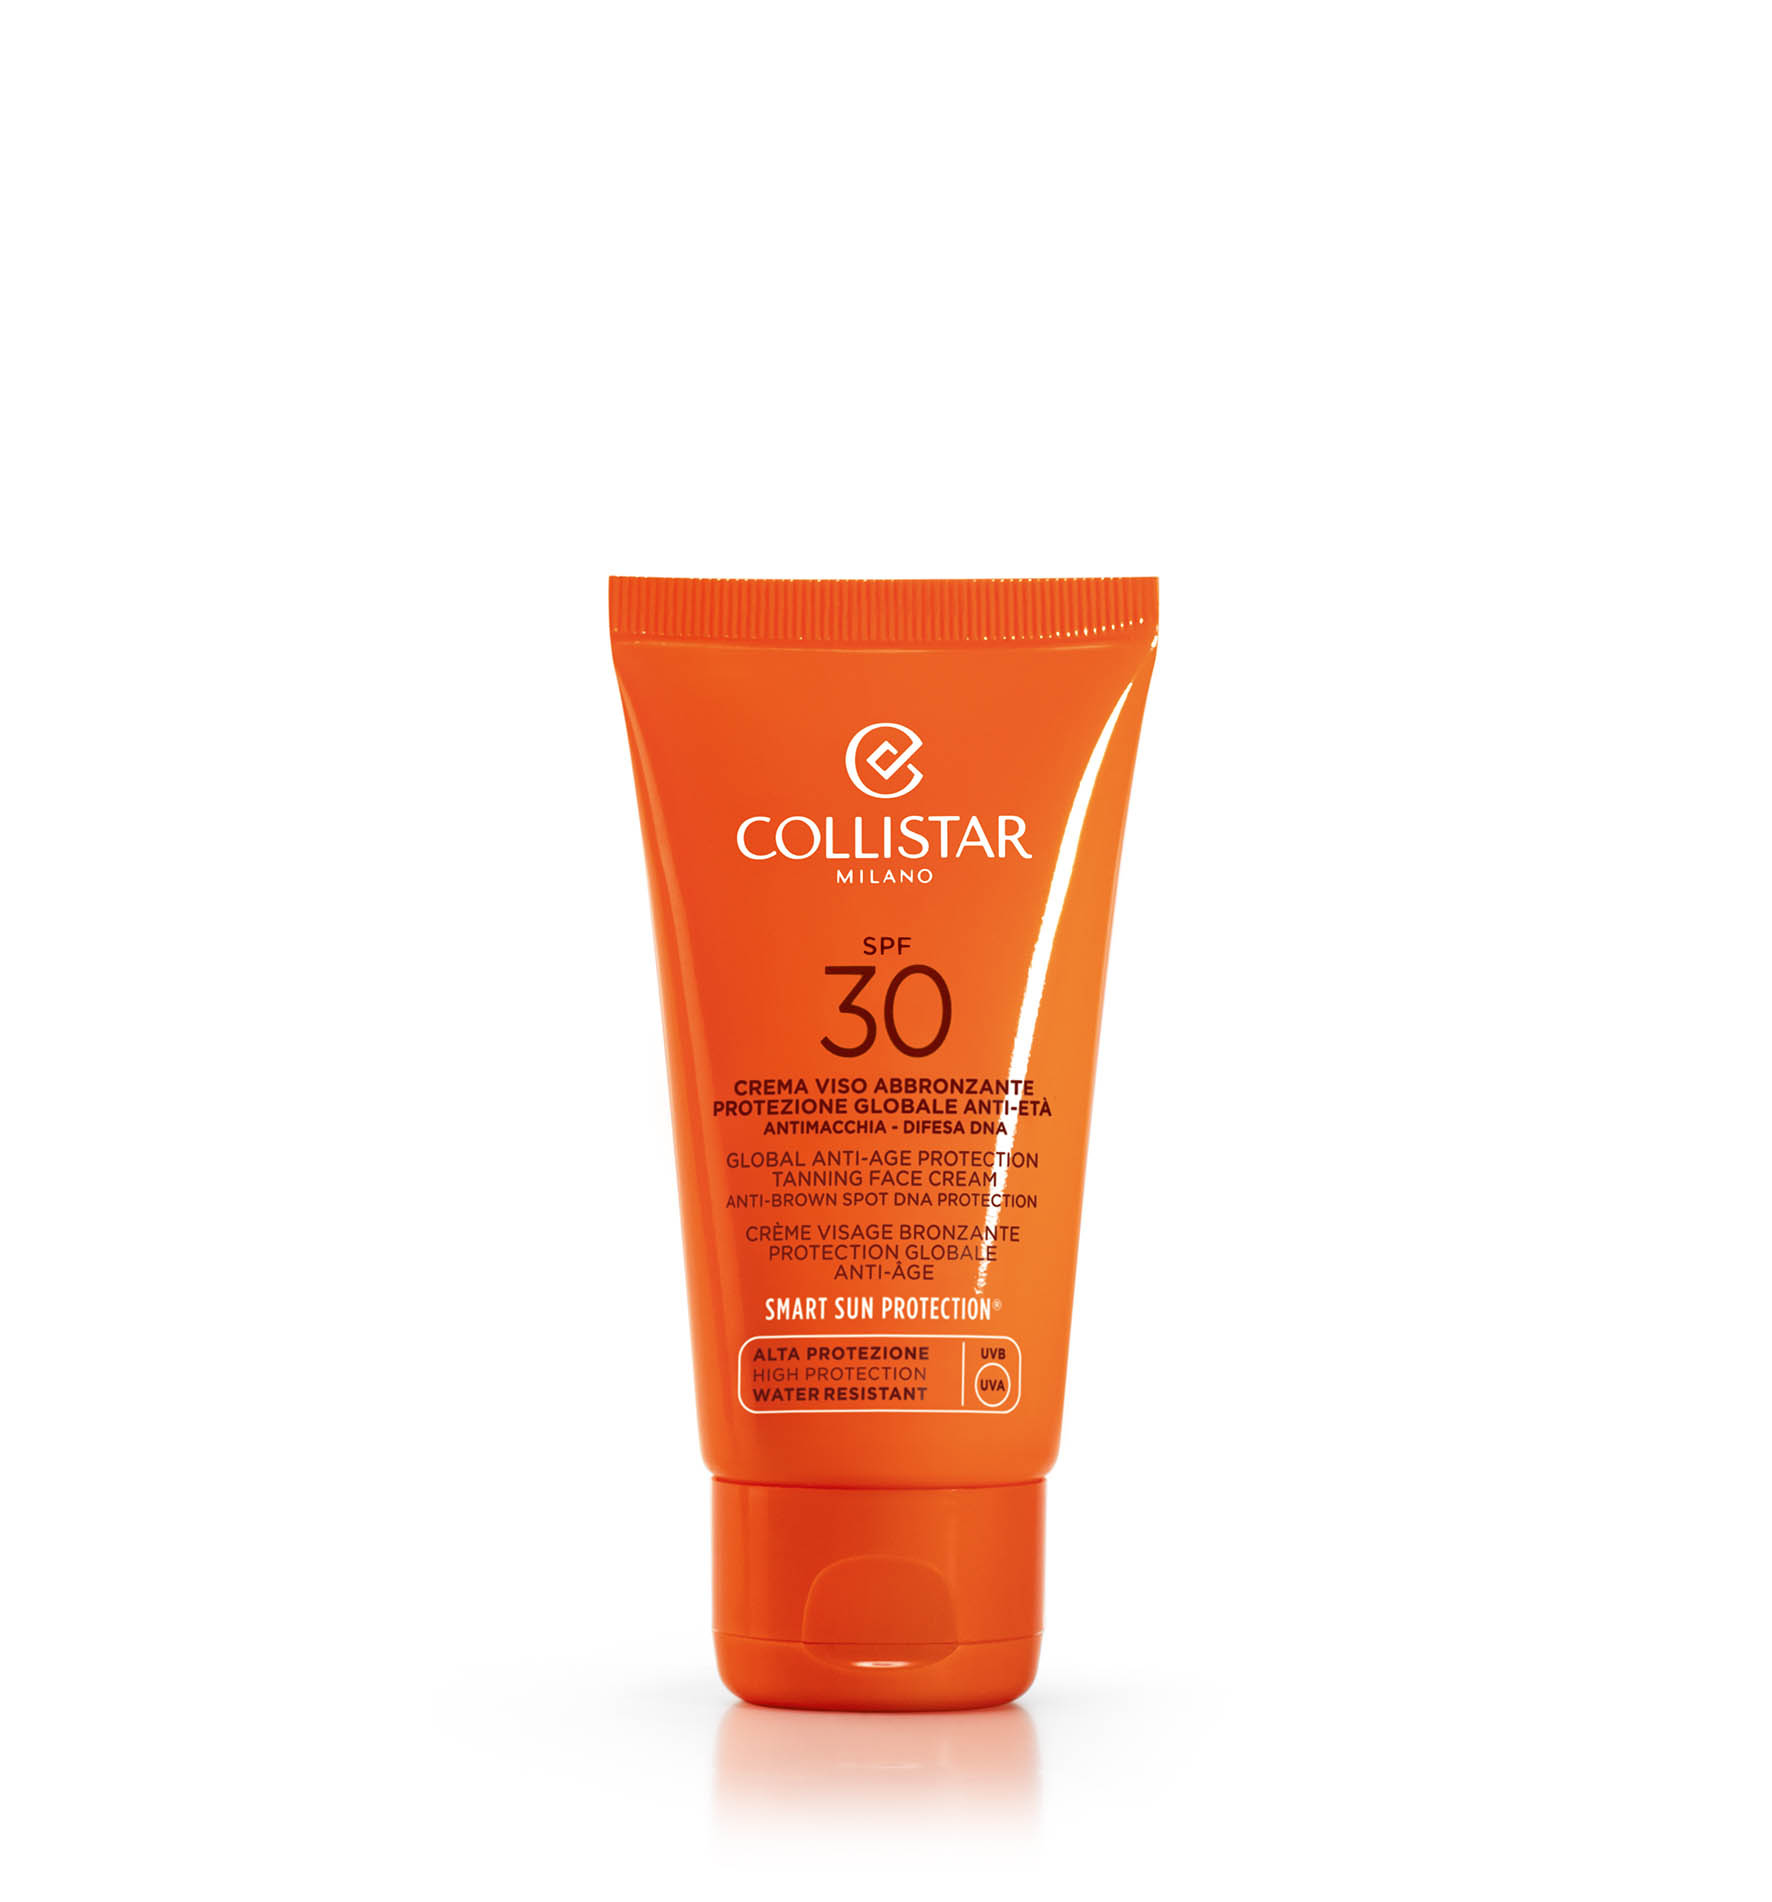 GLOBAL ANTI-AGE PROTECTION TANNING FACE CREAM SPF 30 - High Protection SPF 30-50+ | Collistar - Shop Online Ufficiale